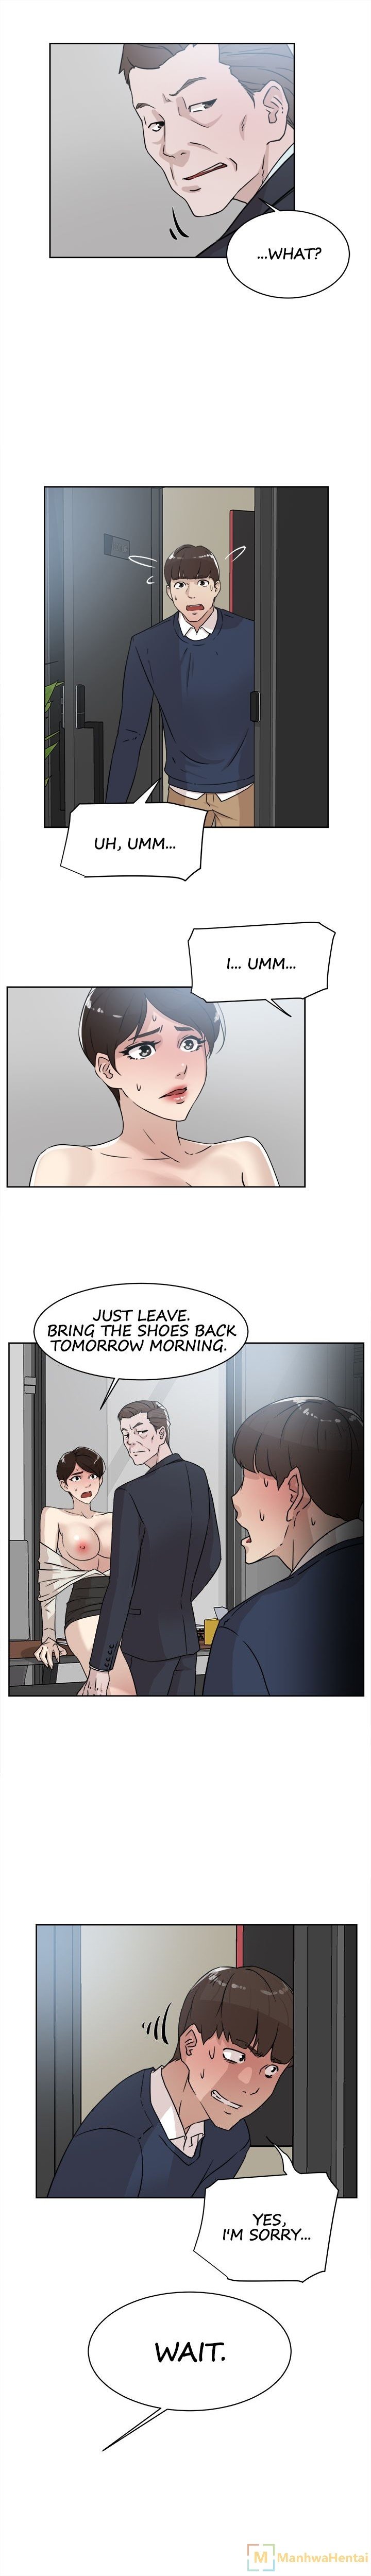 office-affairs-chap-30-1